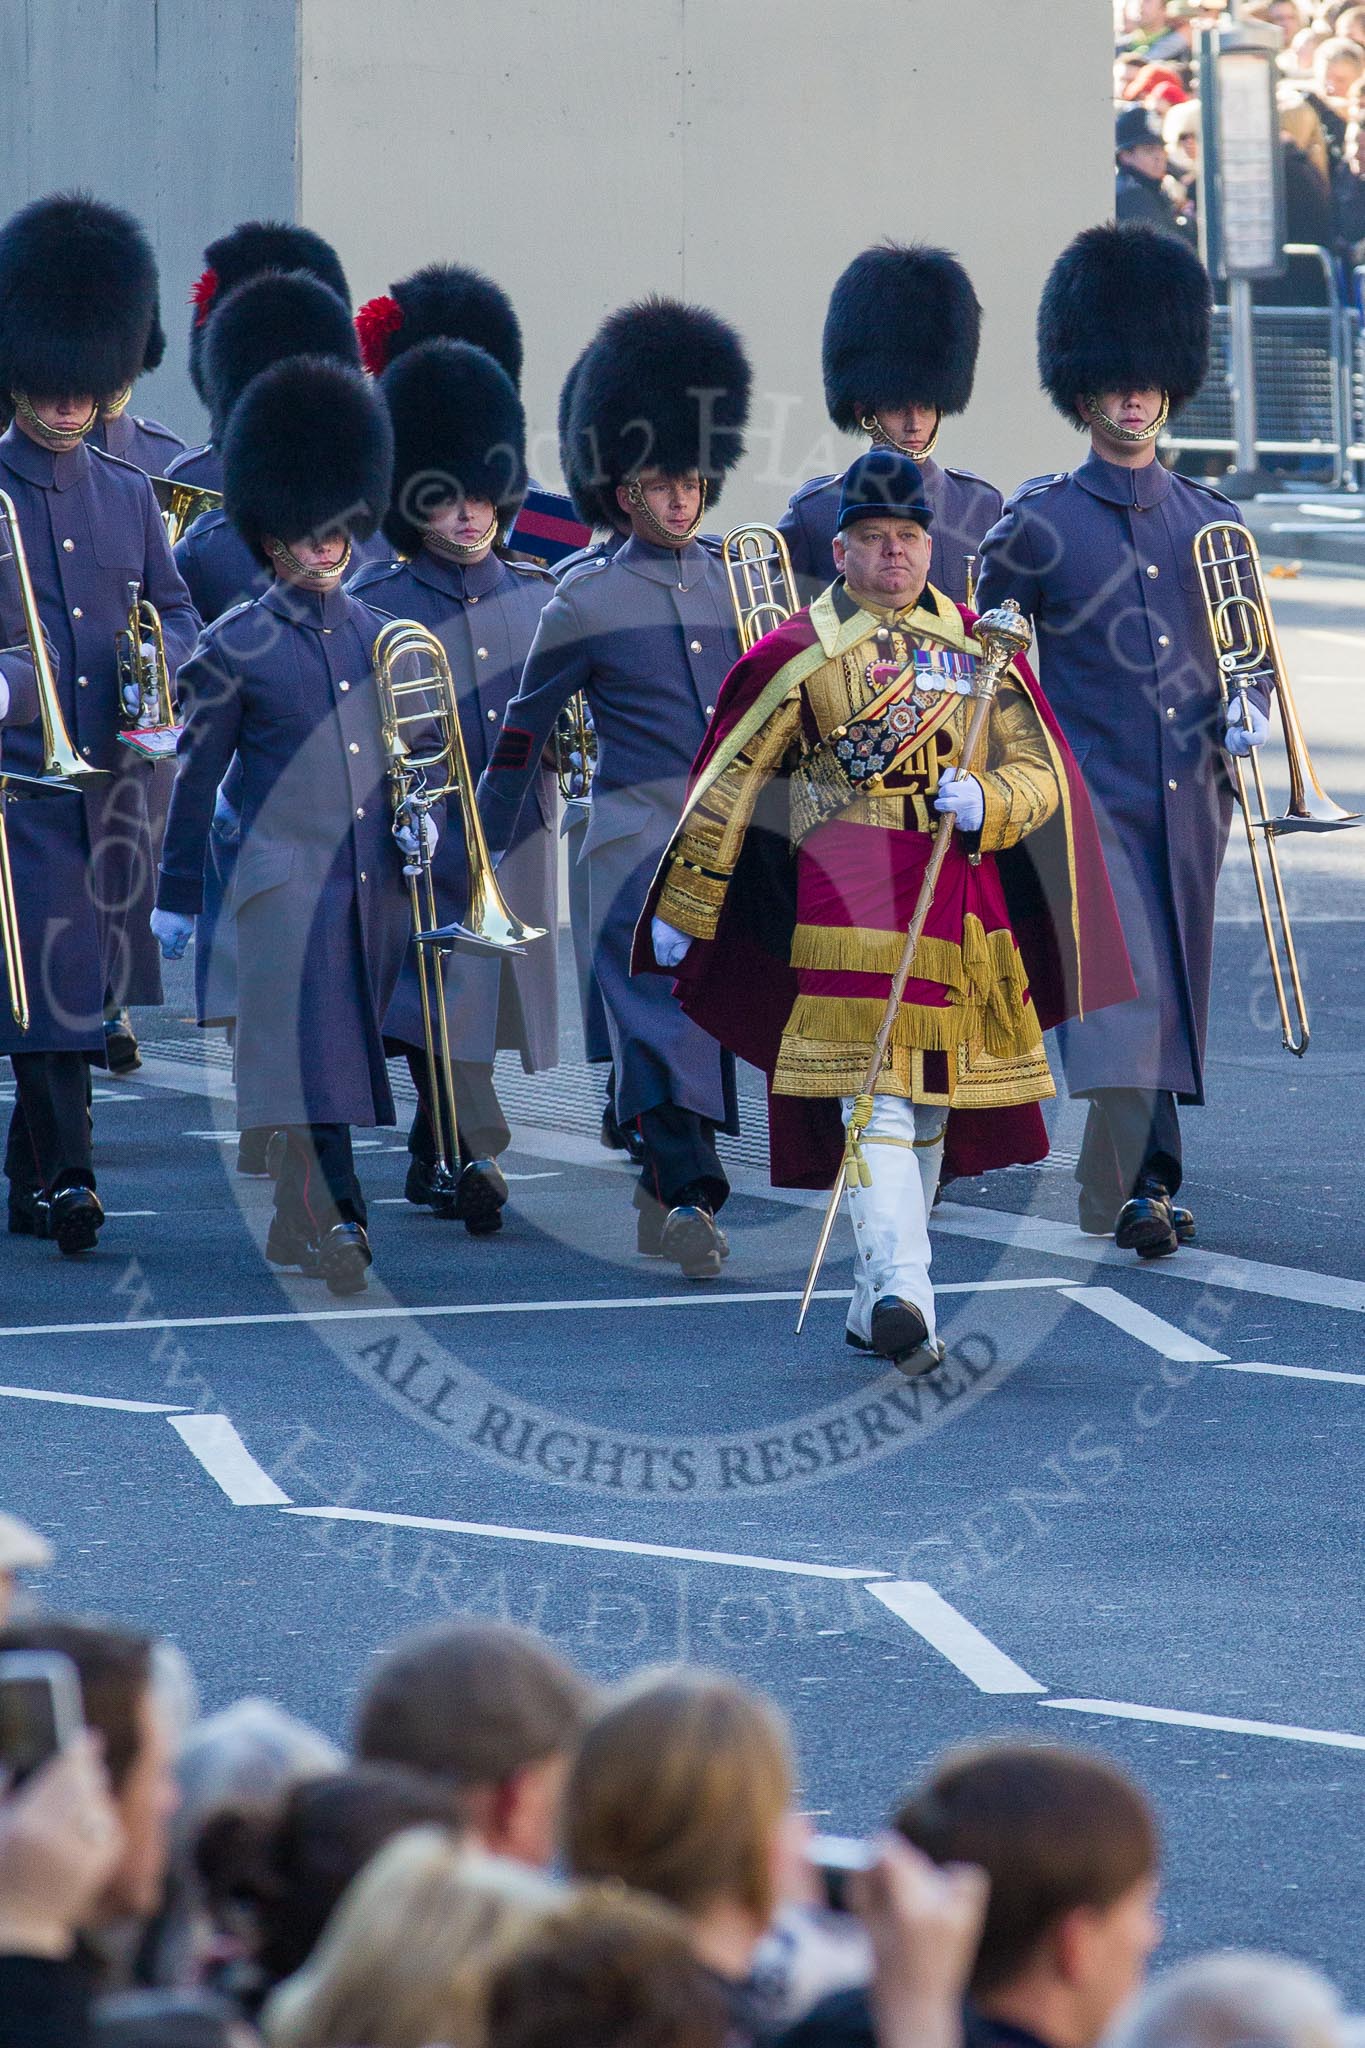 Drum Major Stephen Staite, Grenadier Guards, leading another group of the Massed Bands of the Guards Divisions.